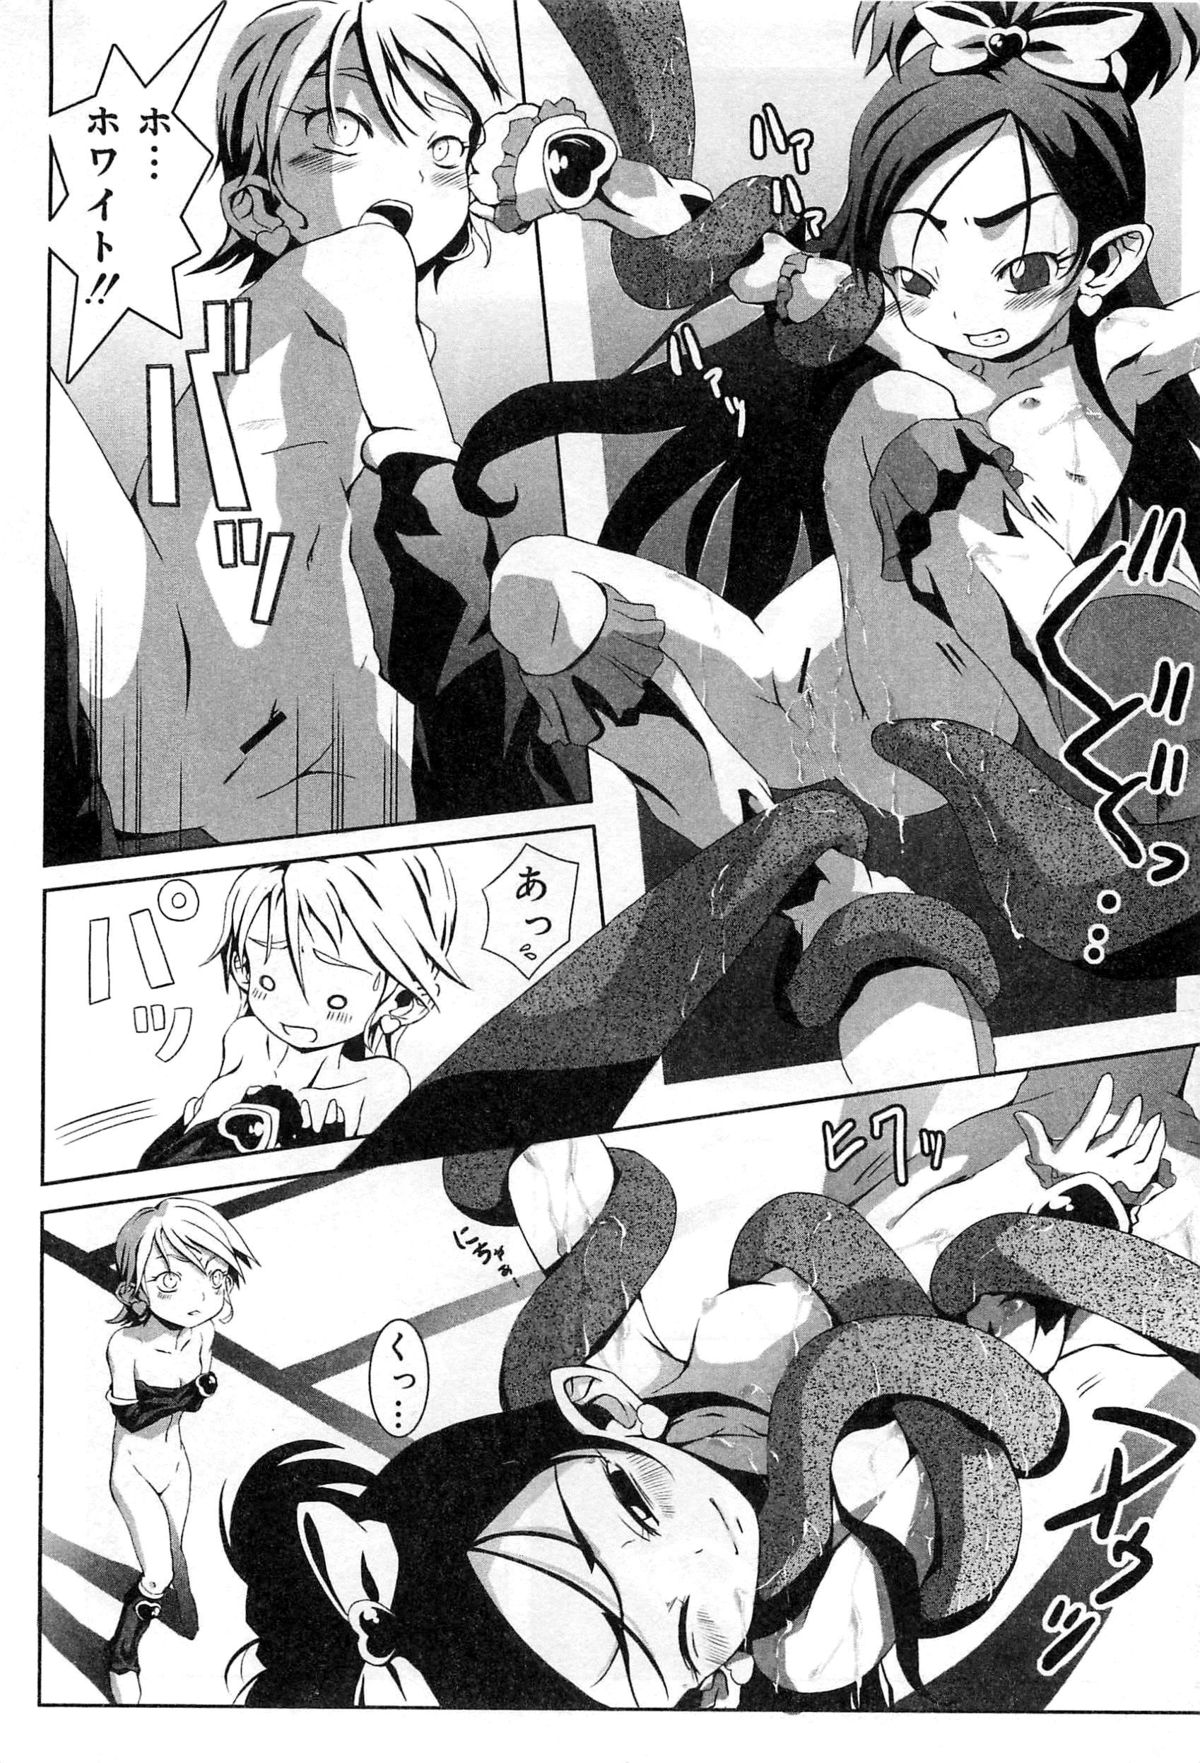 [Anthology] Cure Cure Battle Precure Eroparo page 15 full